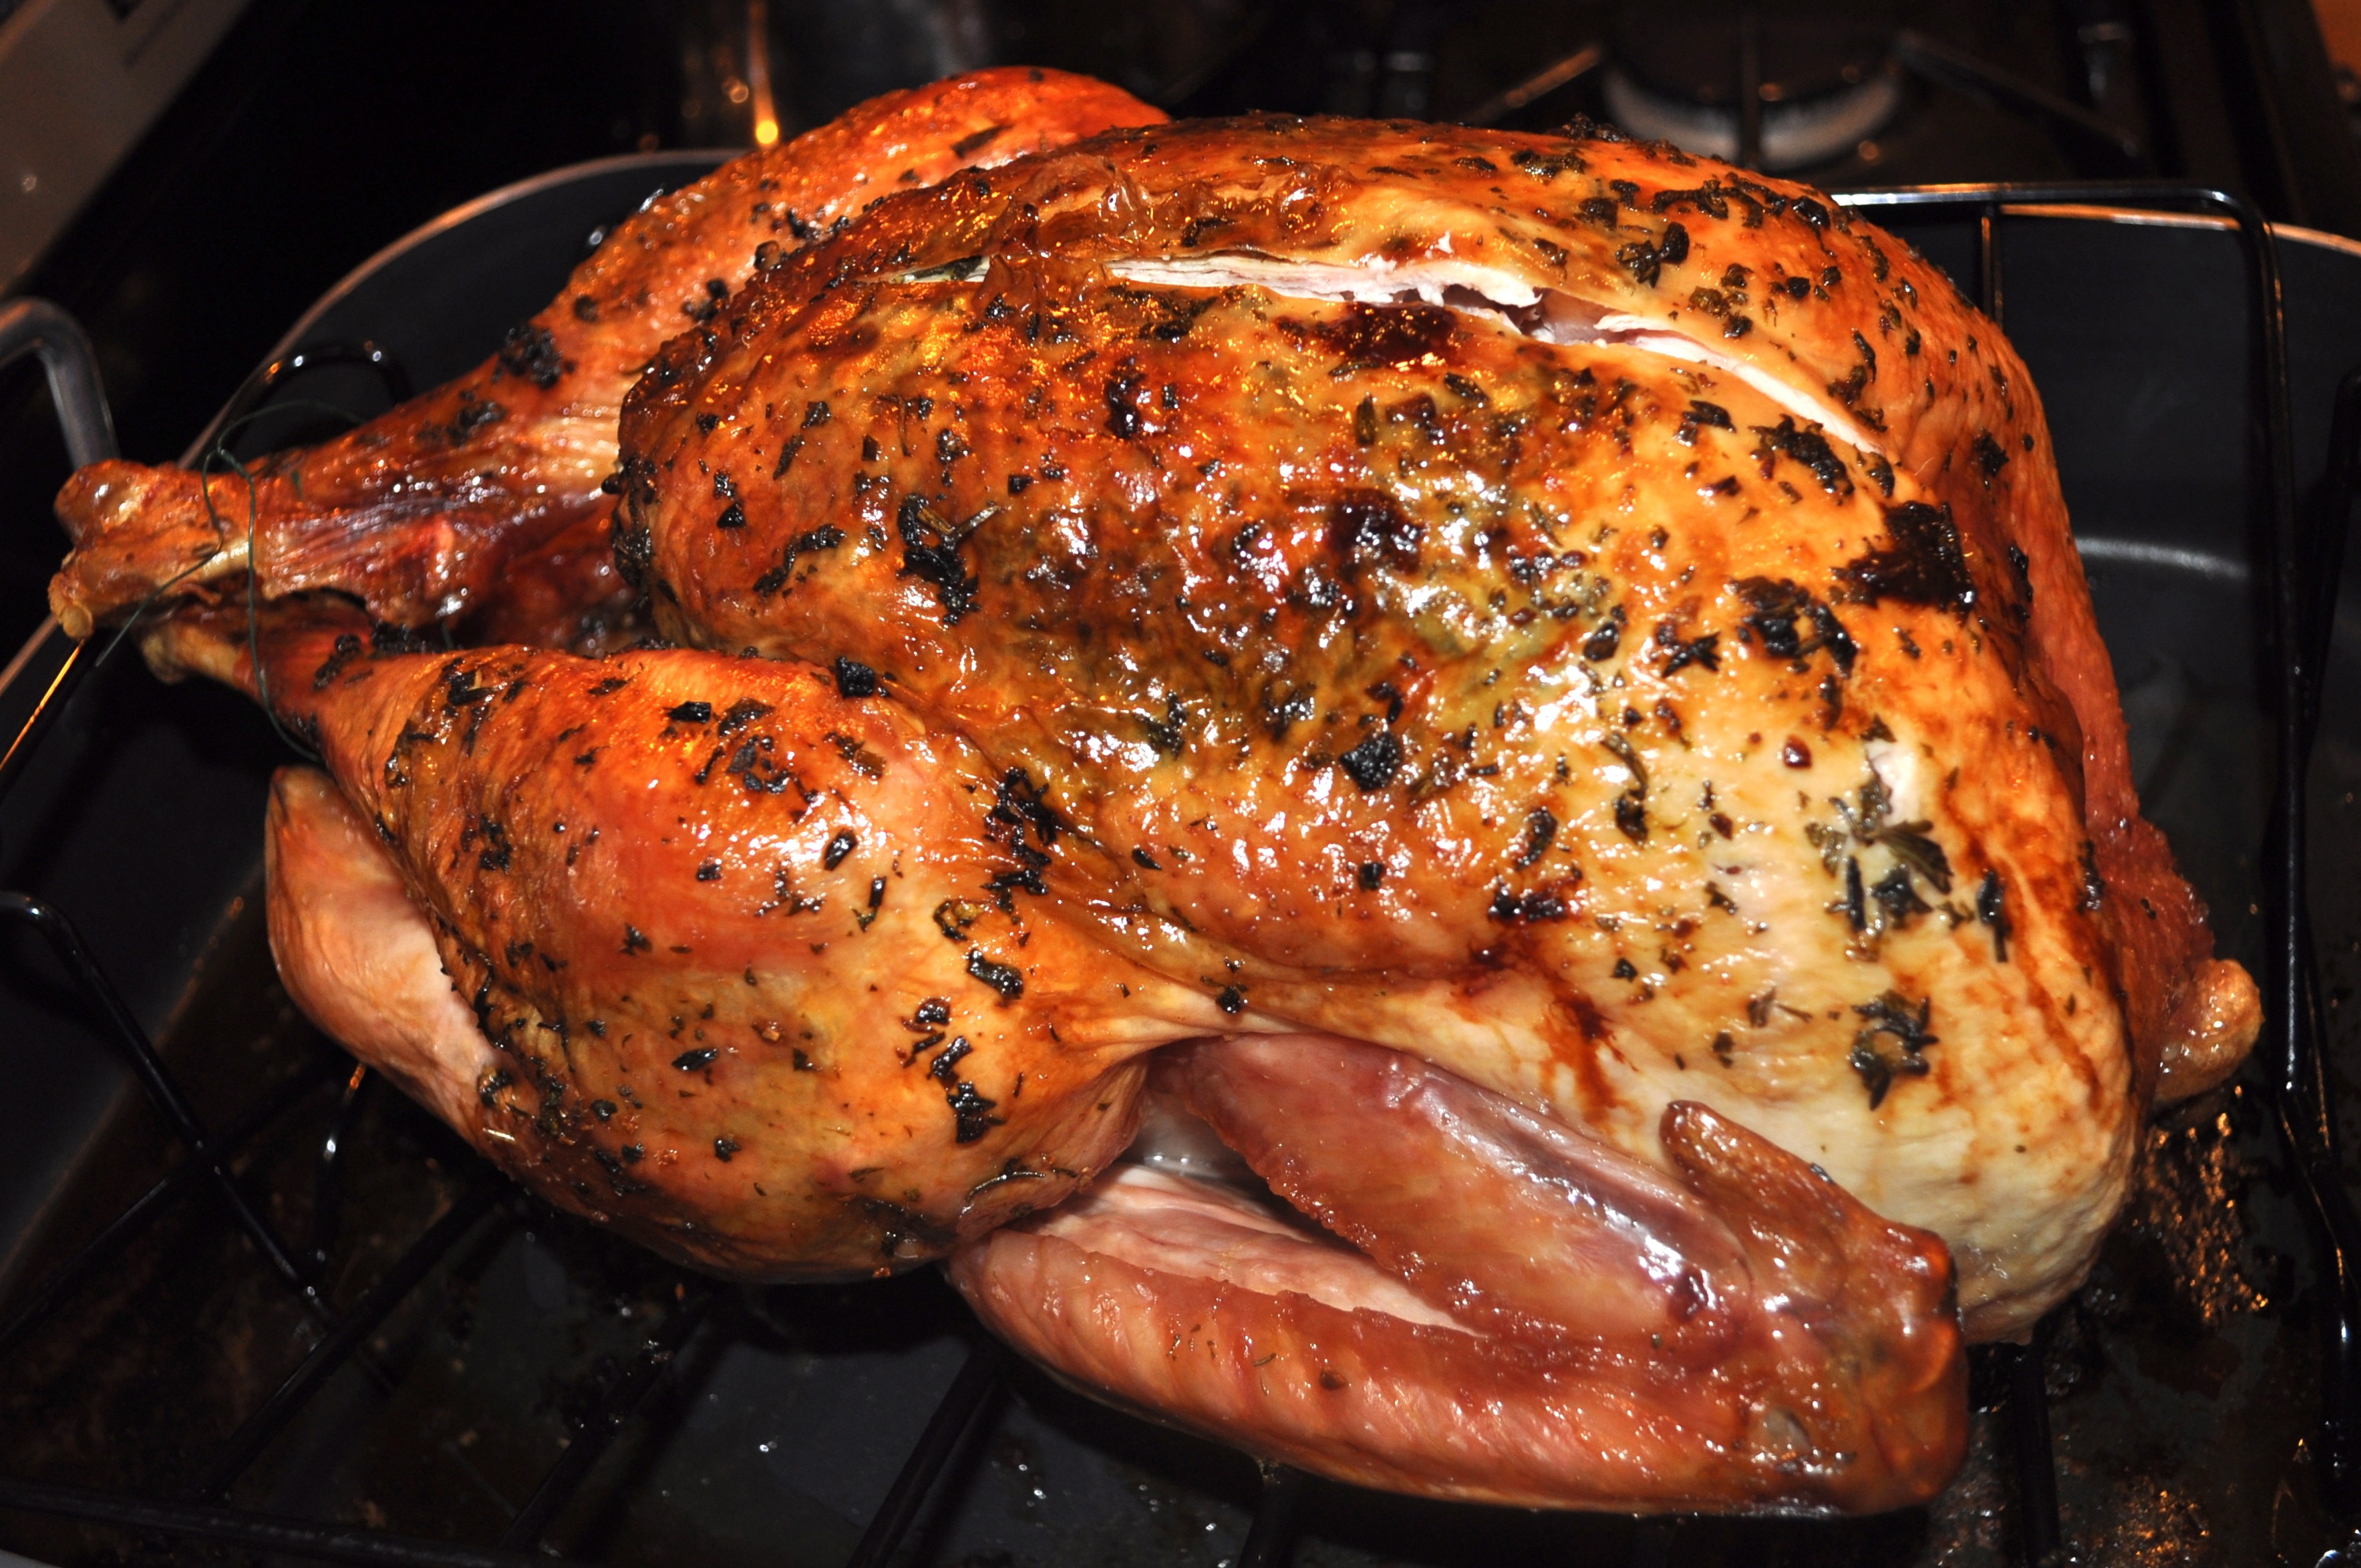 Alton Brown S Classic Brined And Roasted Turkey Steve S Edition Stlbankster Copy Me That